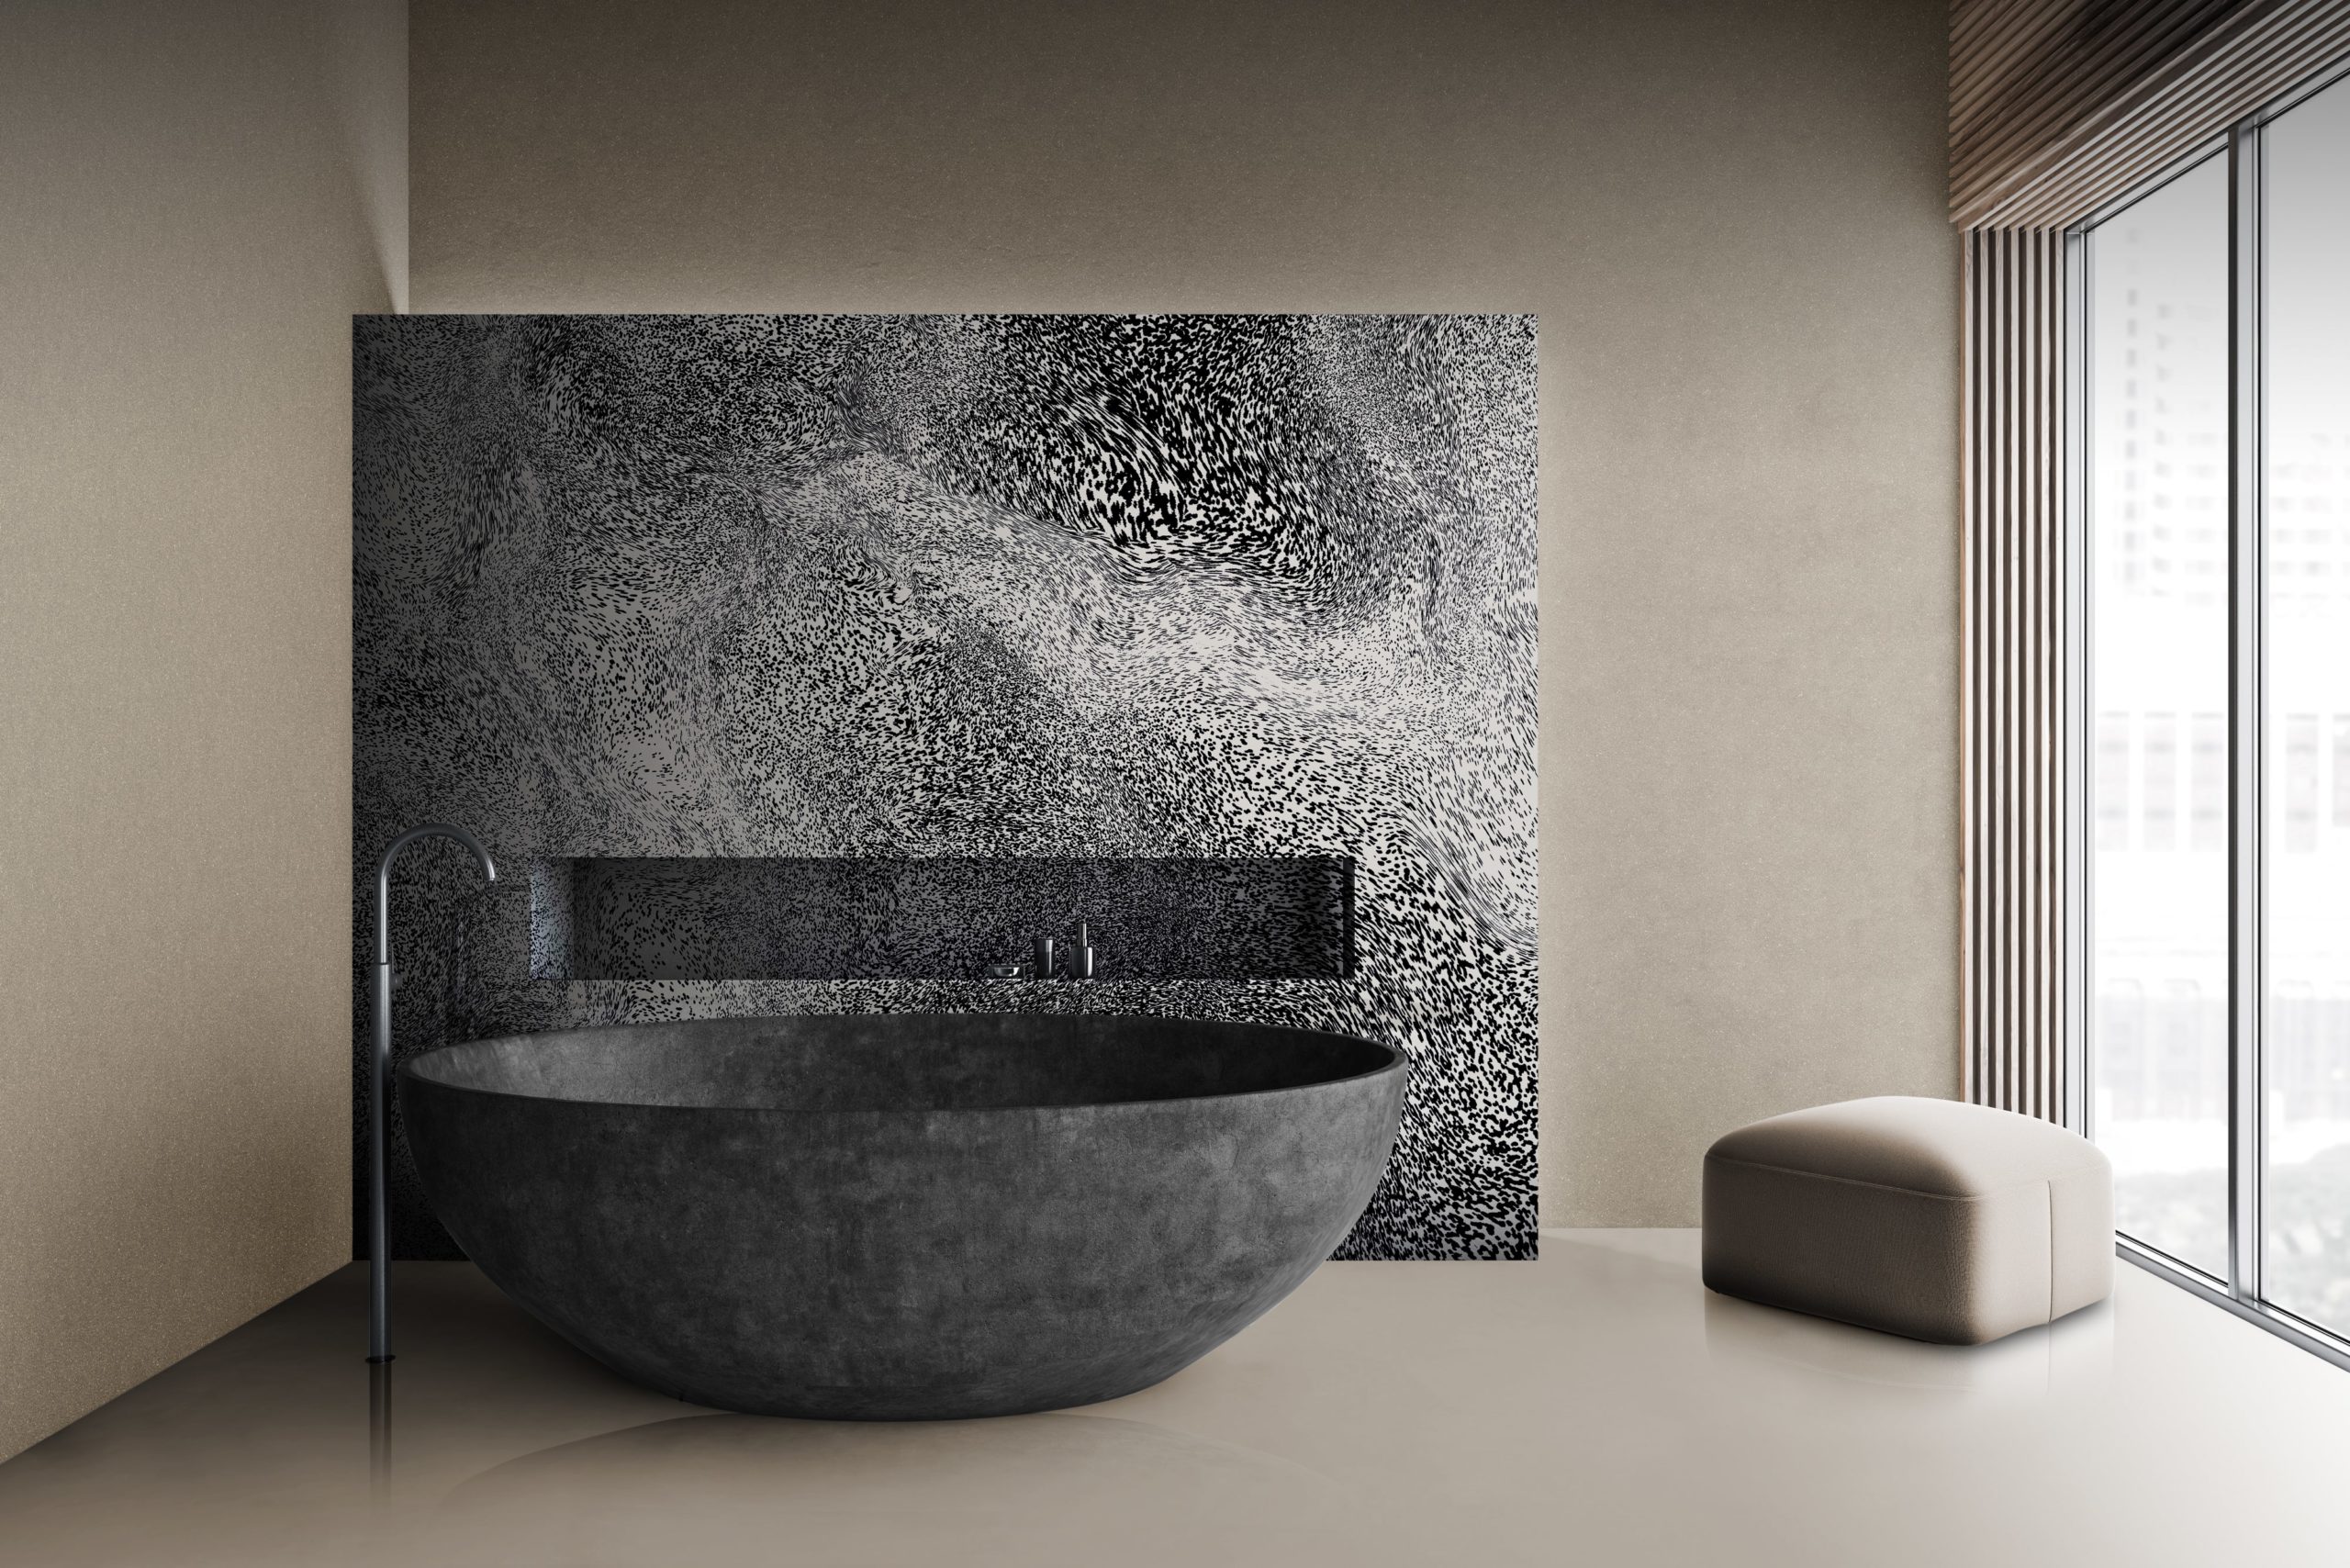 Not only beautiful, but also beautifully natural: rebado focuses on sustainable bathroom design